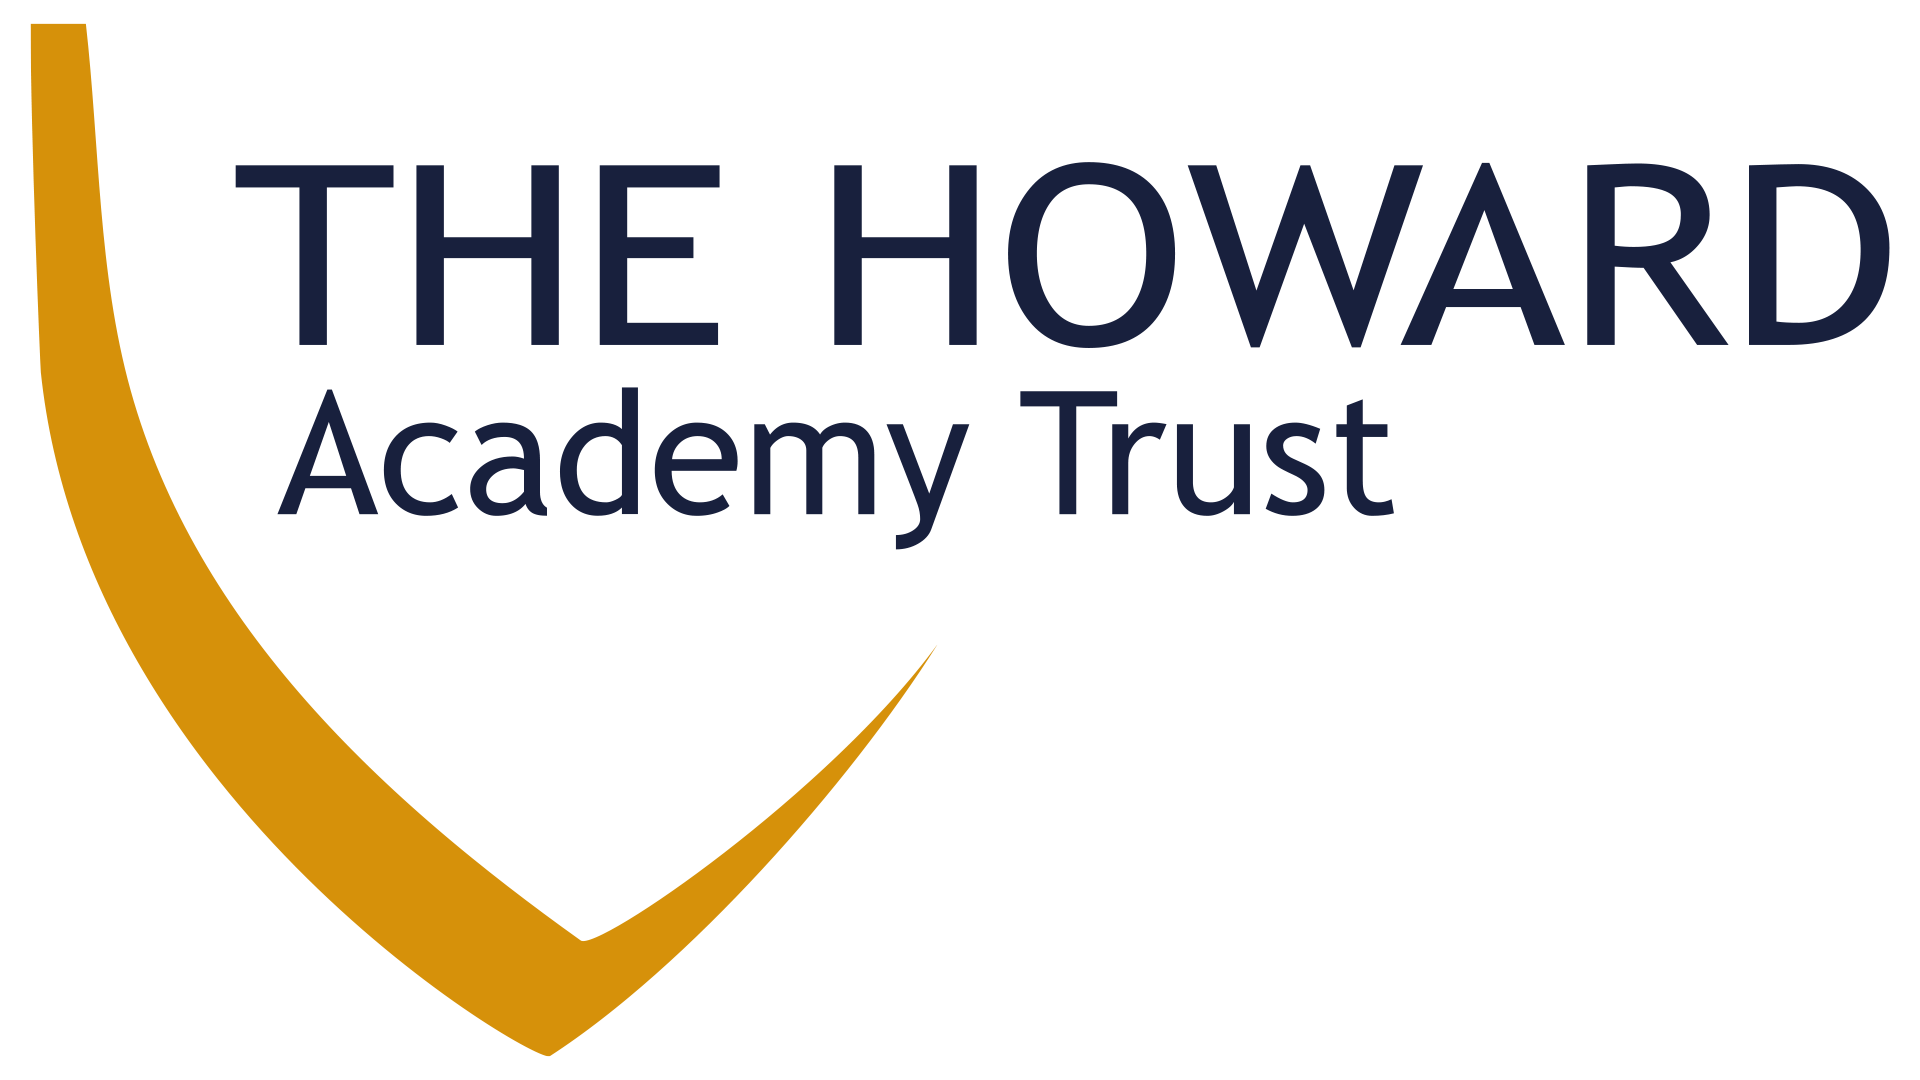 A gold half-shield and accompanying text forms The Howard Academy Trust logo.